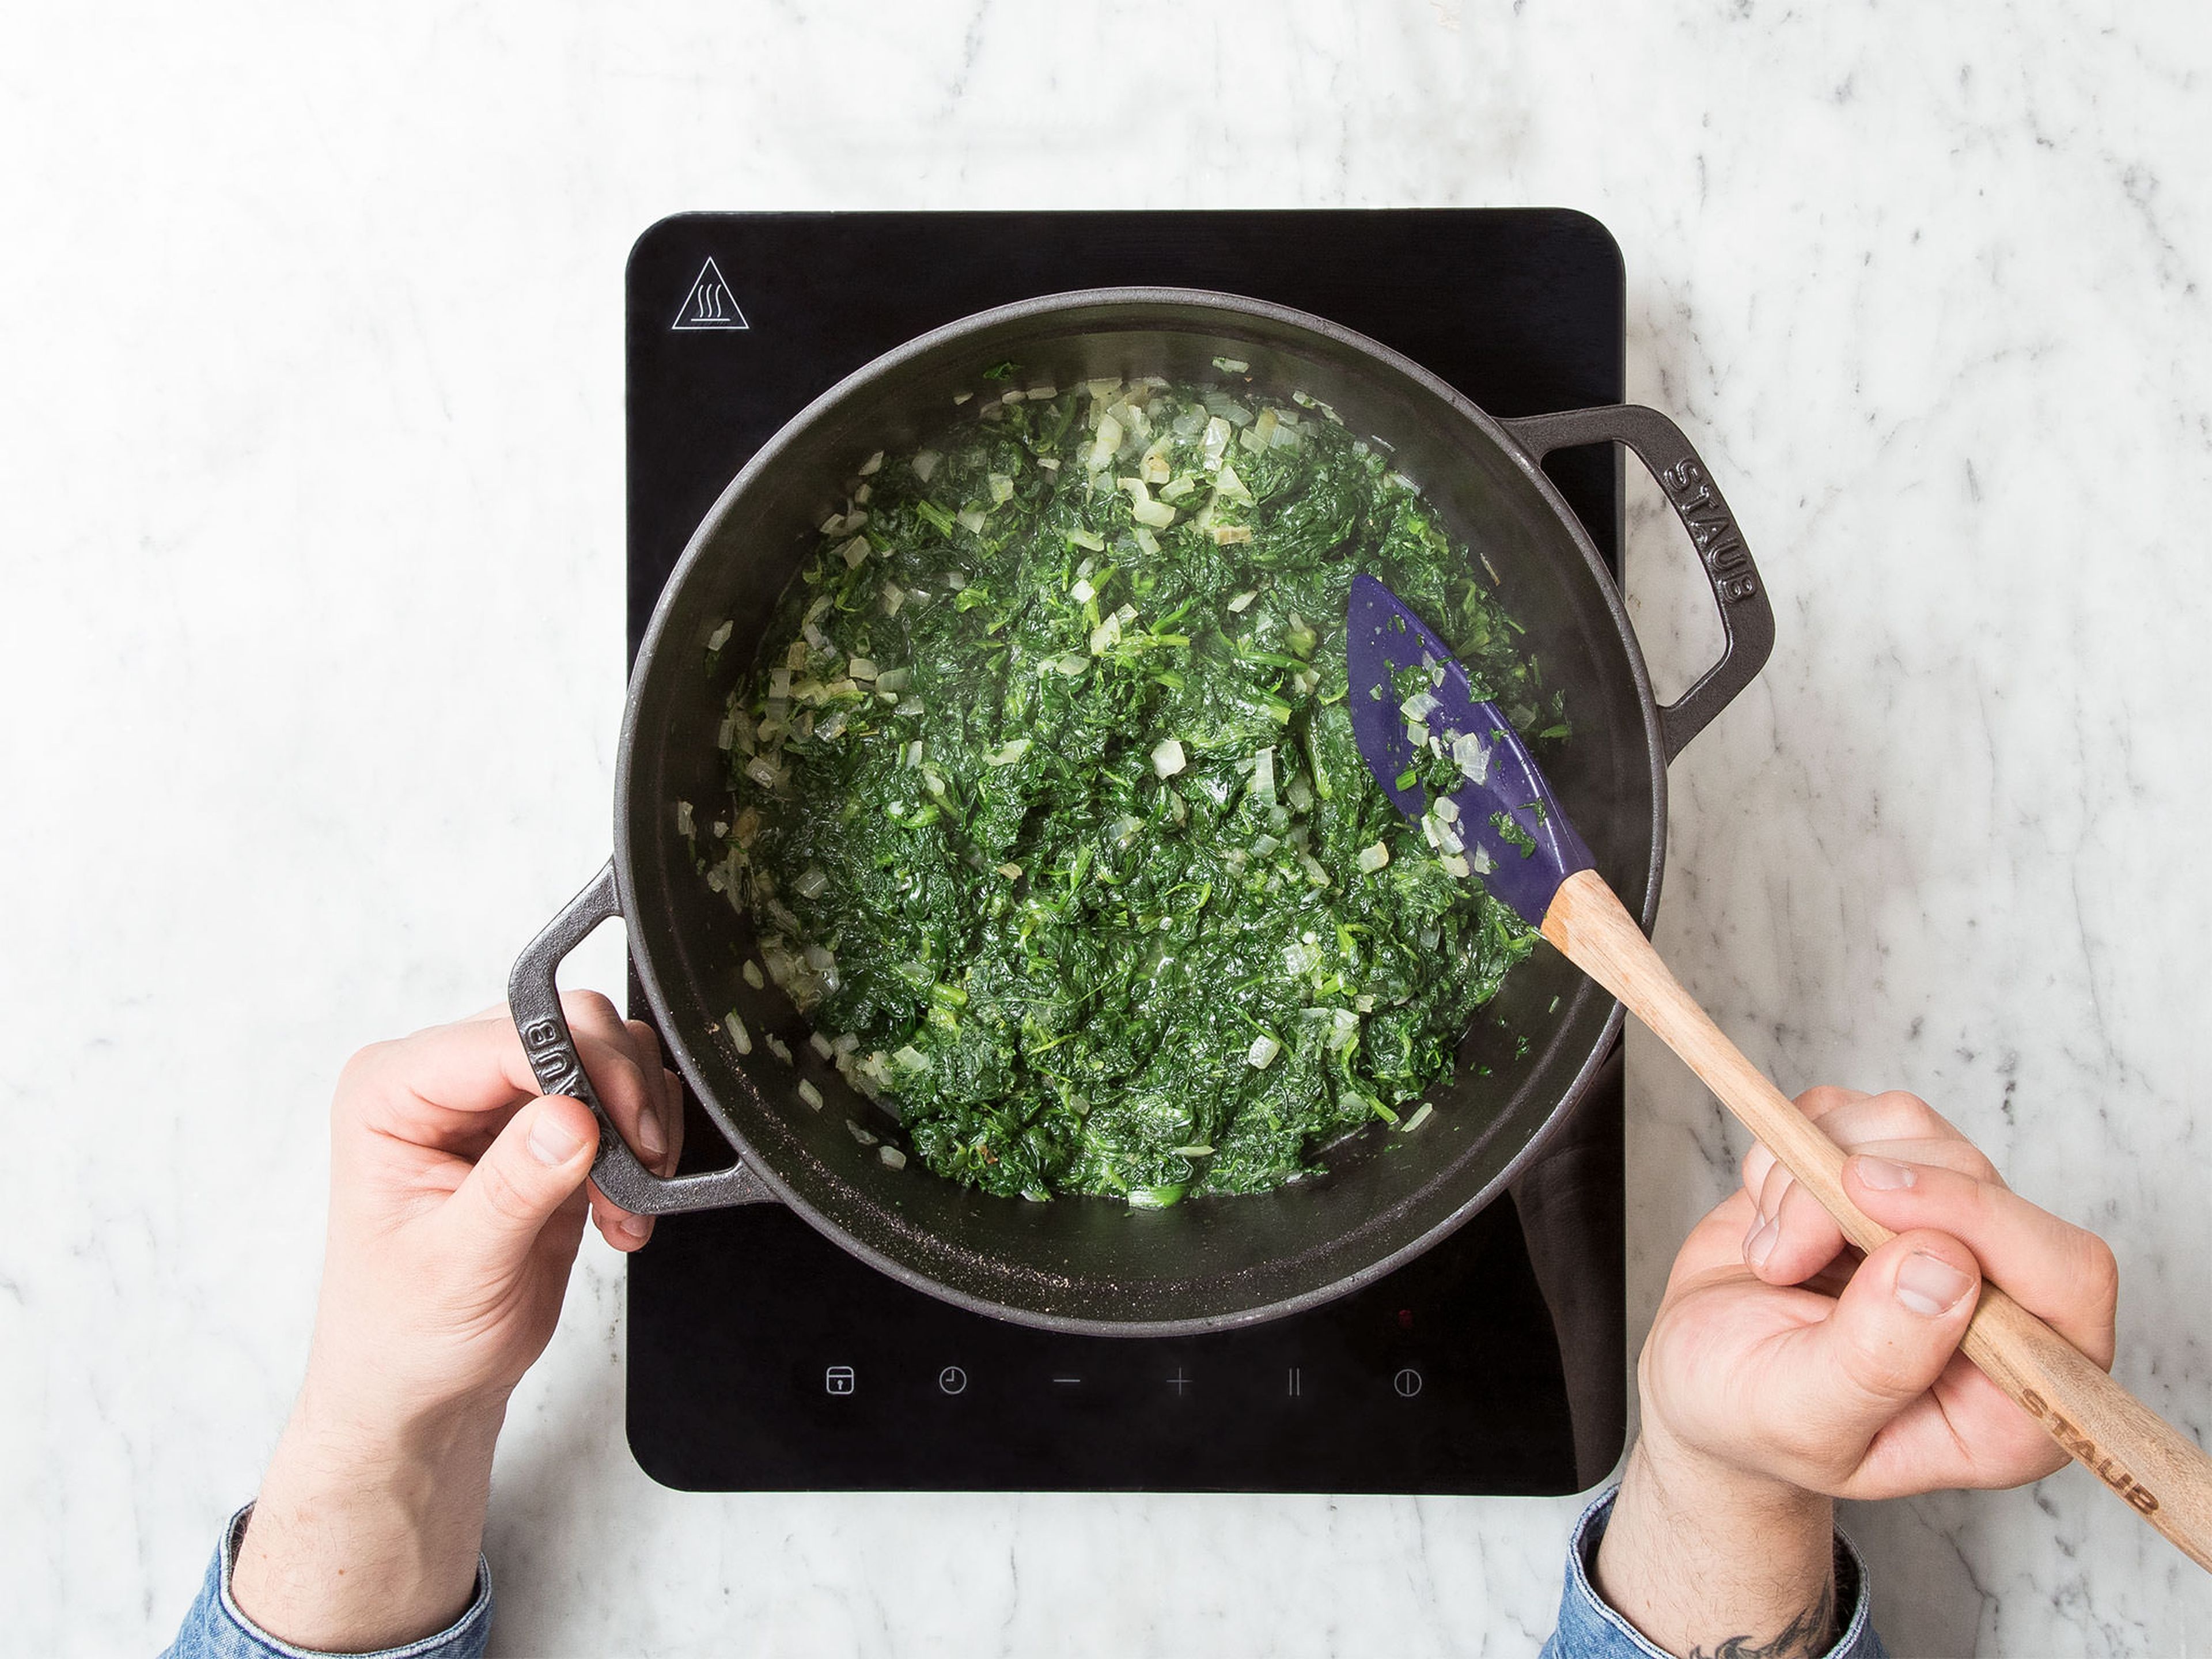 Peel and finely chop garlic and onions. Melt remaining butter in a large pot over medium heat and fry garlic and onions for approx. 2 min. Add frozen spinach and let simmer until the spinach is defrosted and soft. Season with salt, pepper, nutmeg, and sugar to taste.